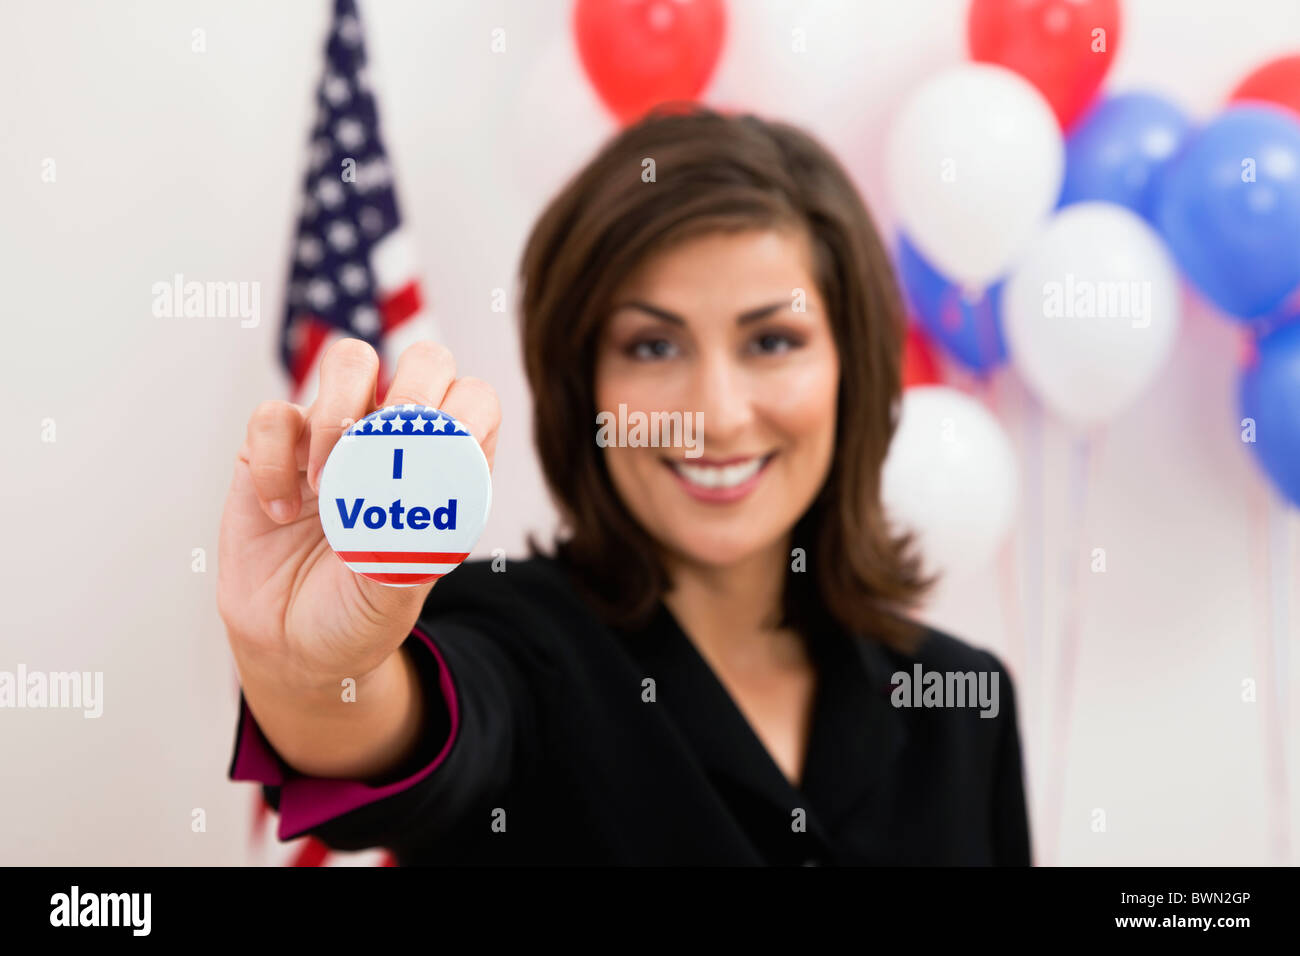 USA, Illinois, Metamora, Portrait of smiling woman holding vote button, US flag and balloons in background Stock Photo